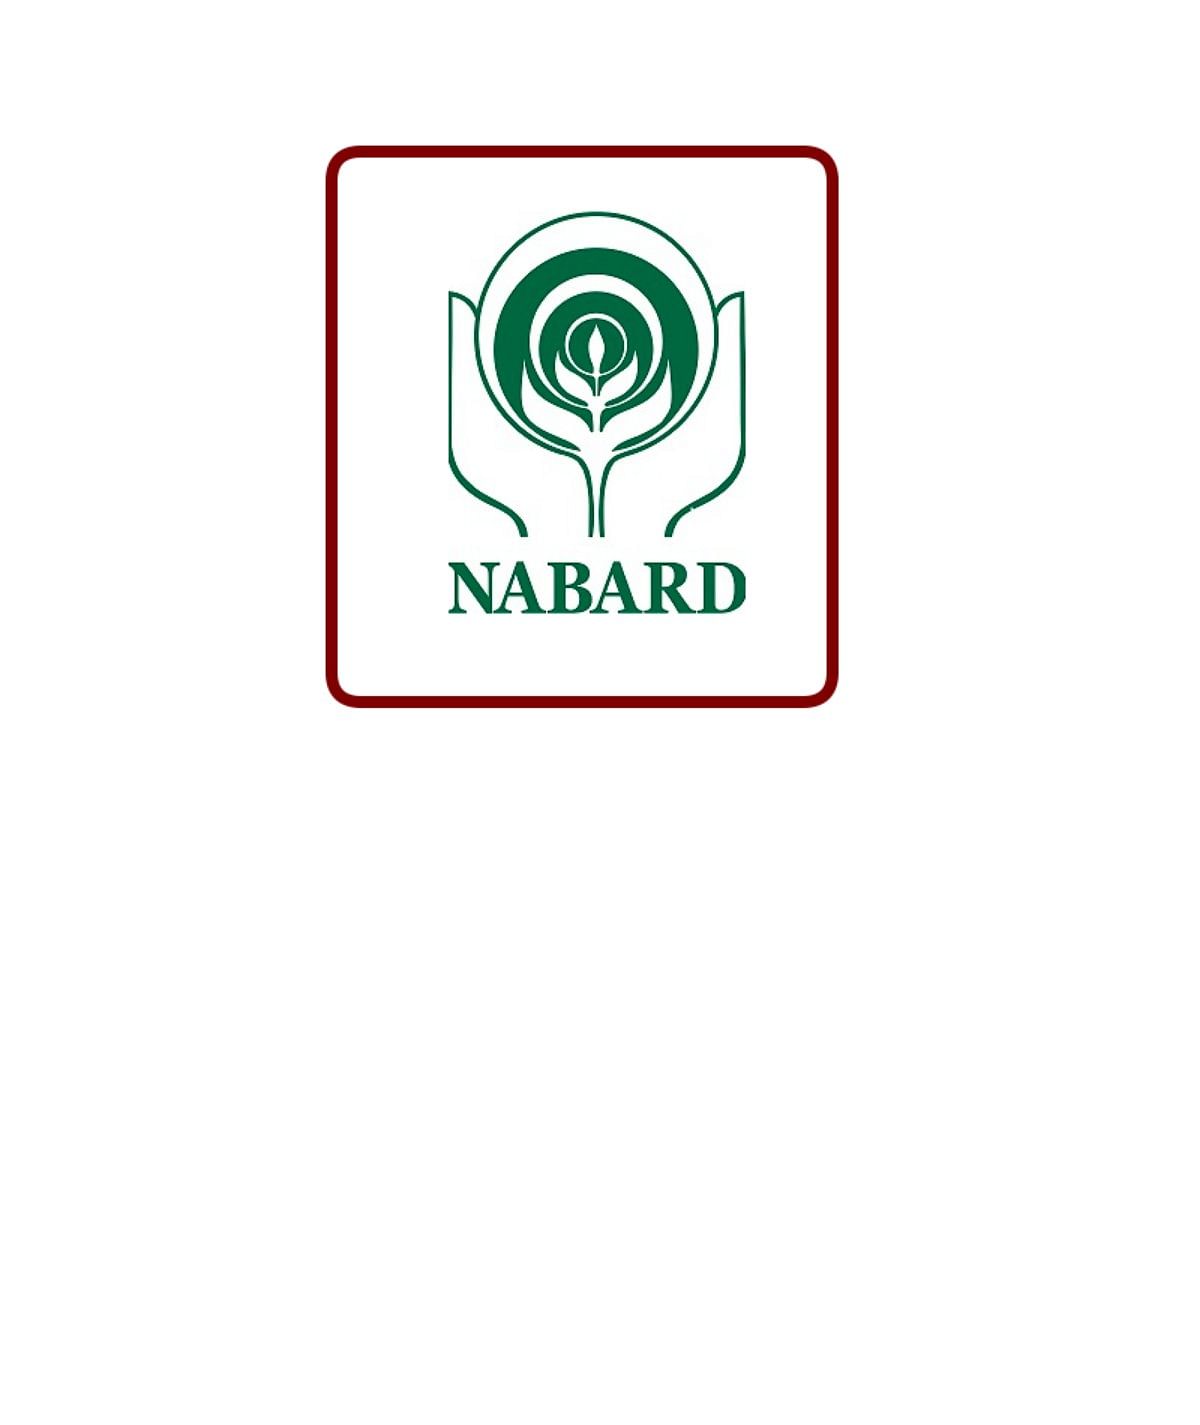 NABARD Extends Application Process for Officers Grade A Post, Check Detailed Information